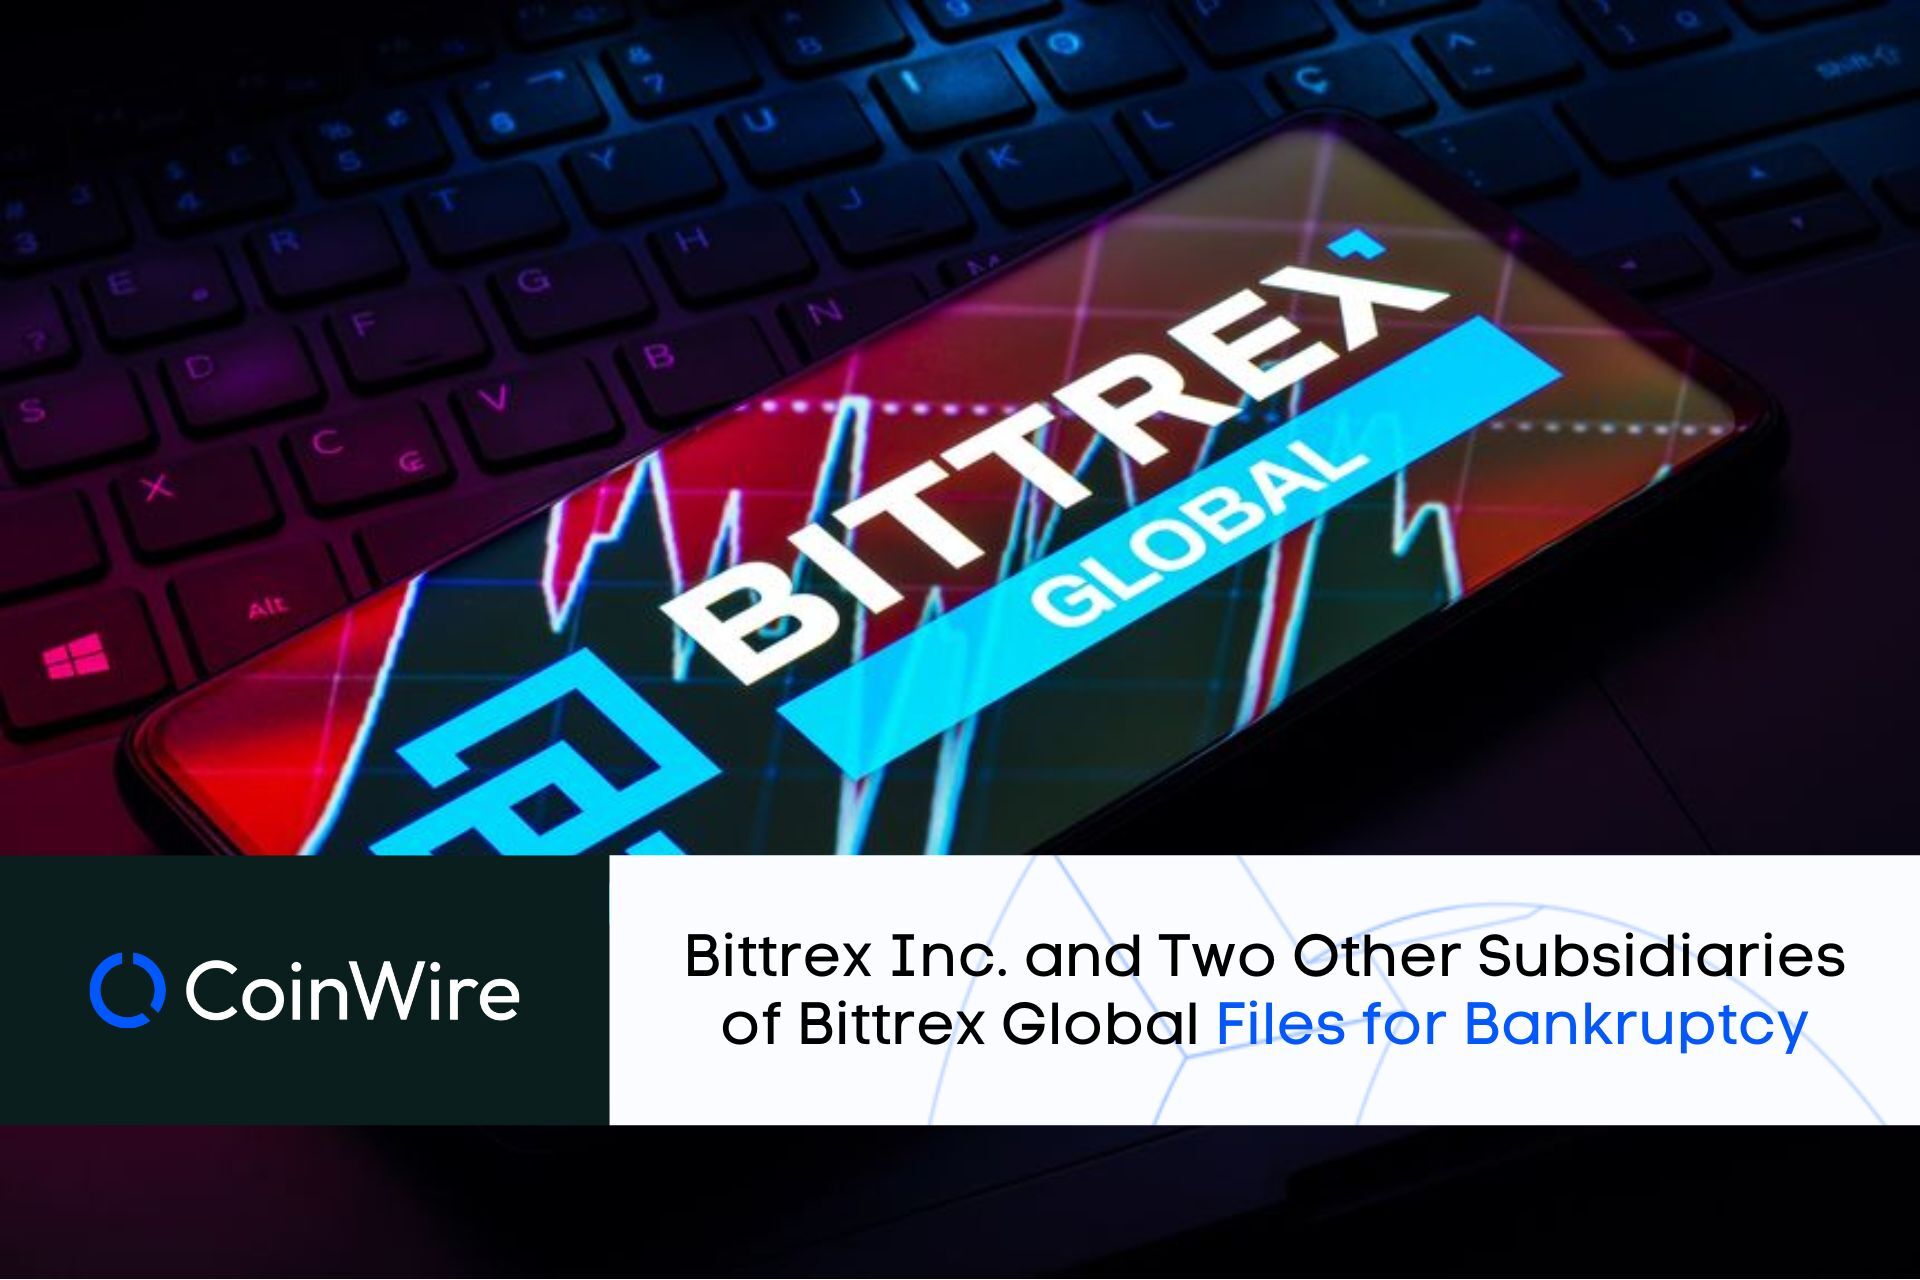 Bittrex Inc. And Two Other Subsidiaries Of Bittrex Global Files For Bankruptcy